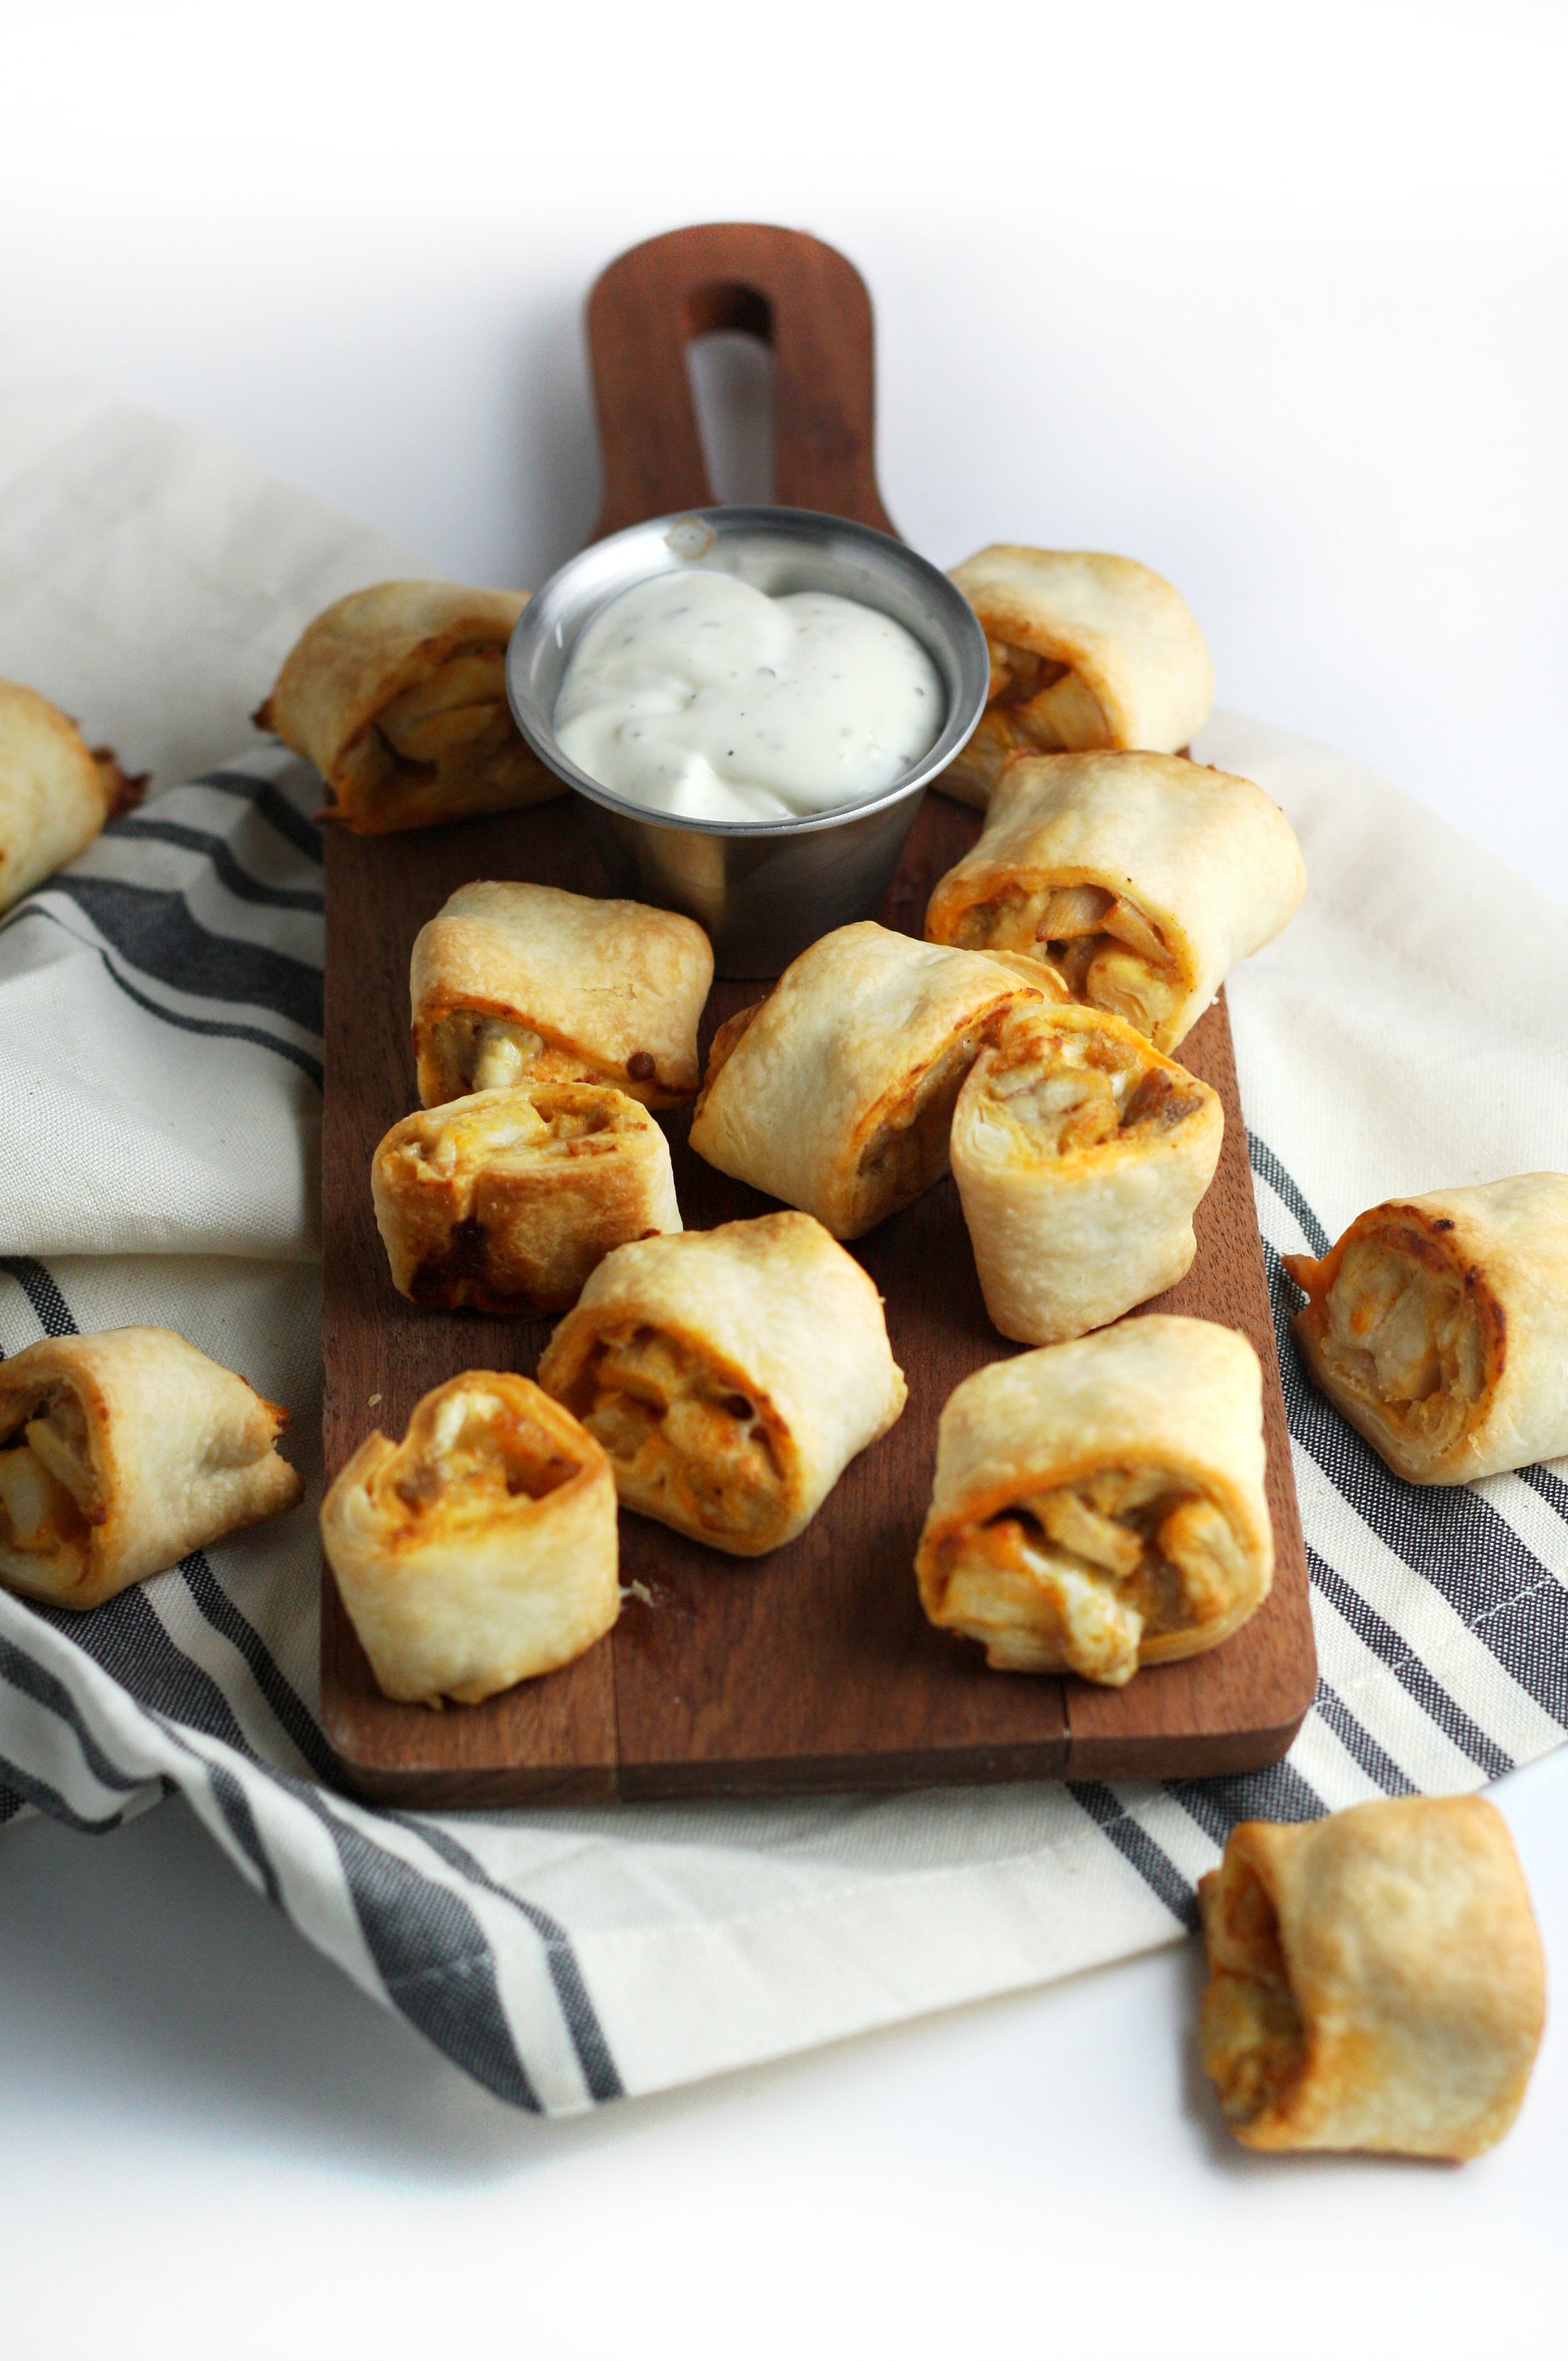 These flavorful Buffalo Chicken Blue Cheese Bites are the perfect party appetizer for entertaining. Whether you’re hosting a tailgate party or happy hour at home, these budget-friendly small bites need to be on the menu.